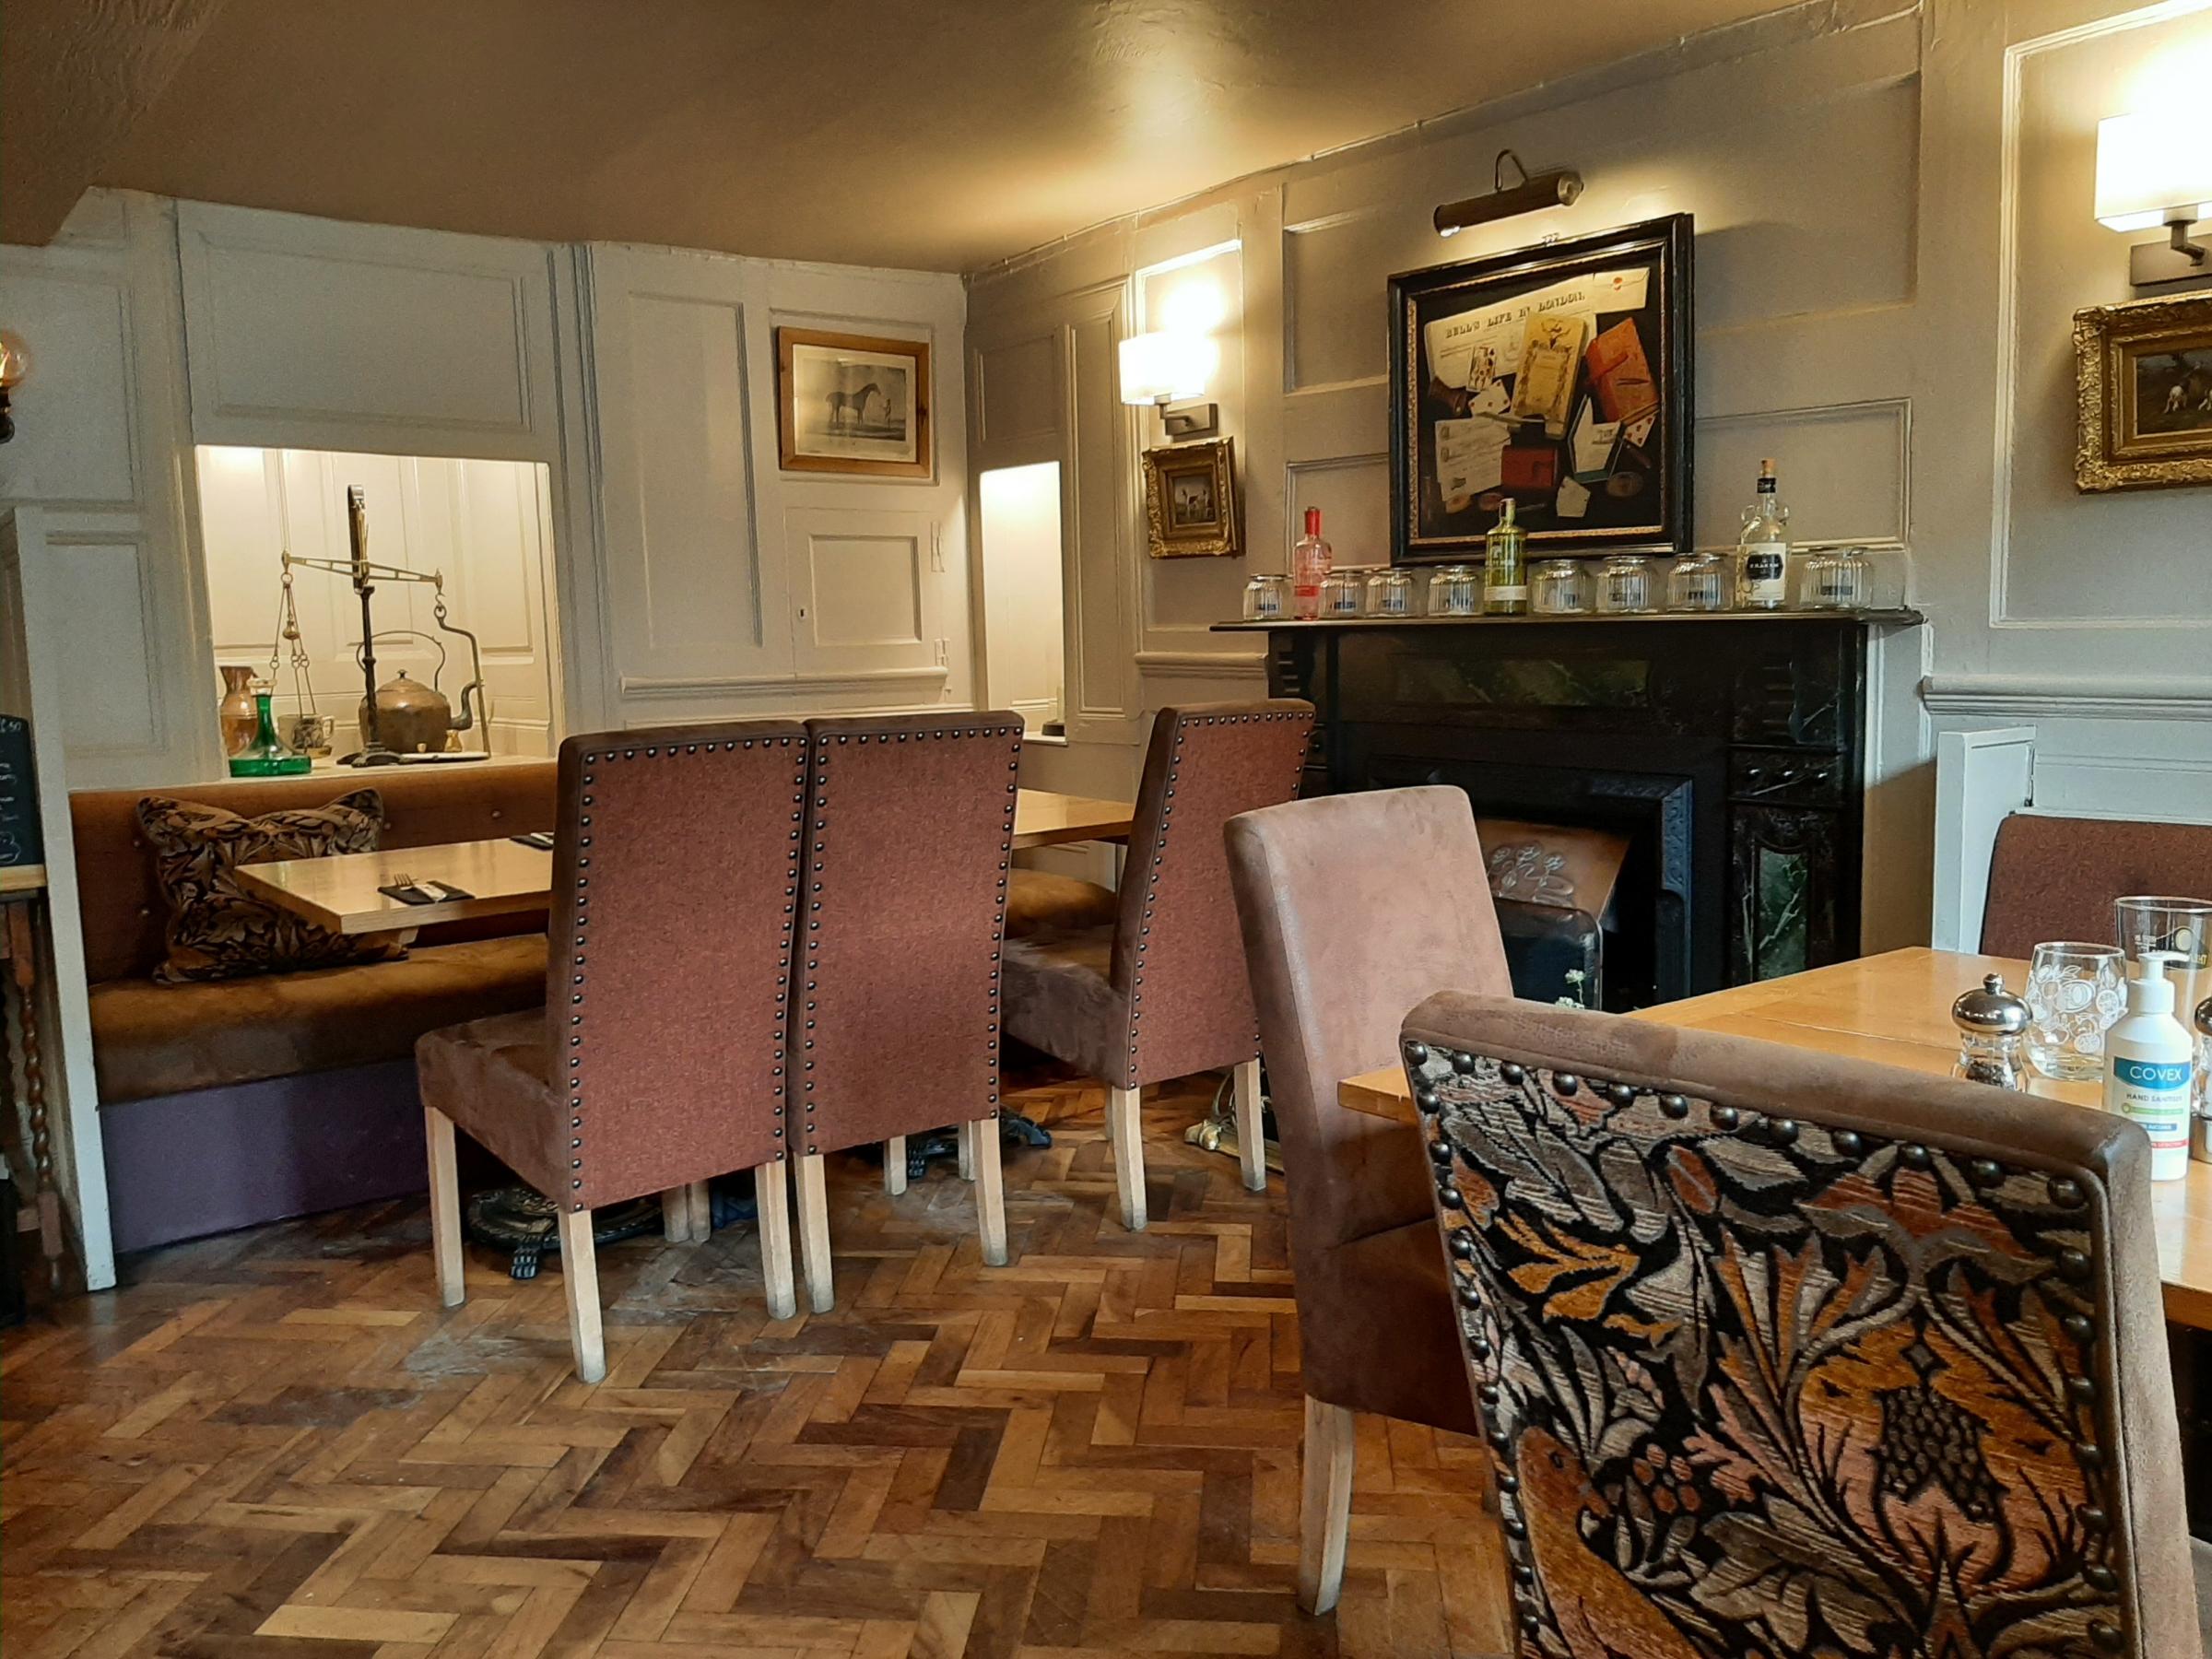 The dining area at the Kings Arms, Askrigg, is full of old fashioned charm